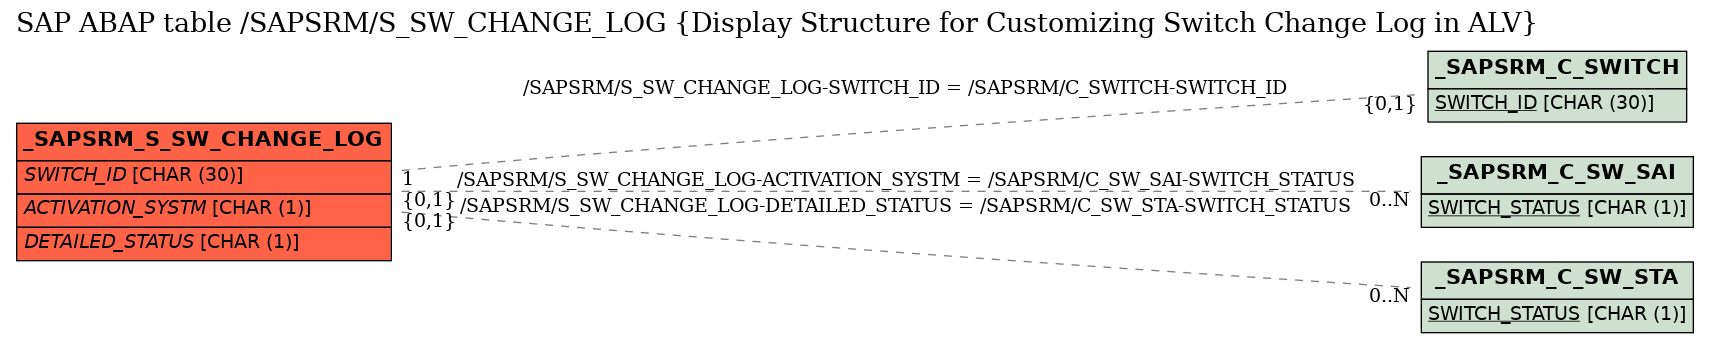 E-R Diagram for table /SAPSRM/S_SW_CHANGE_LOG (Display Structure for Customizing Switch Change Log in ALV)